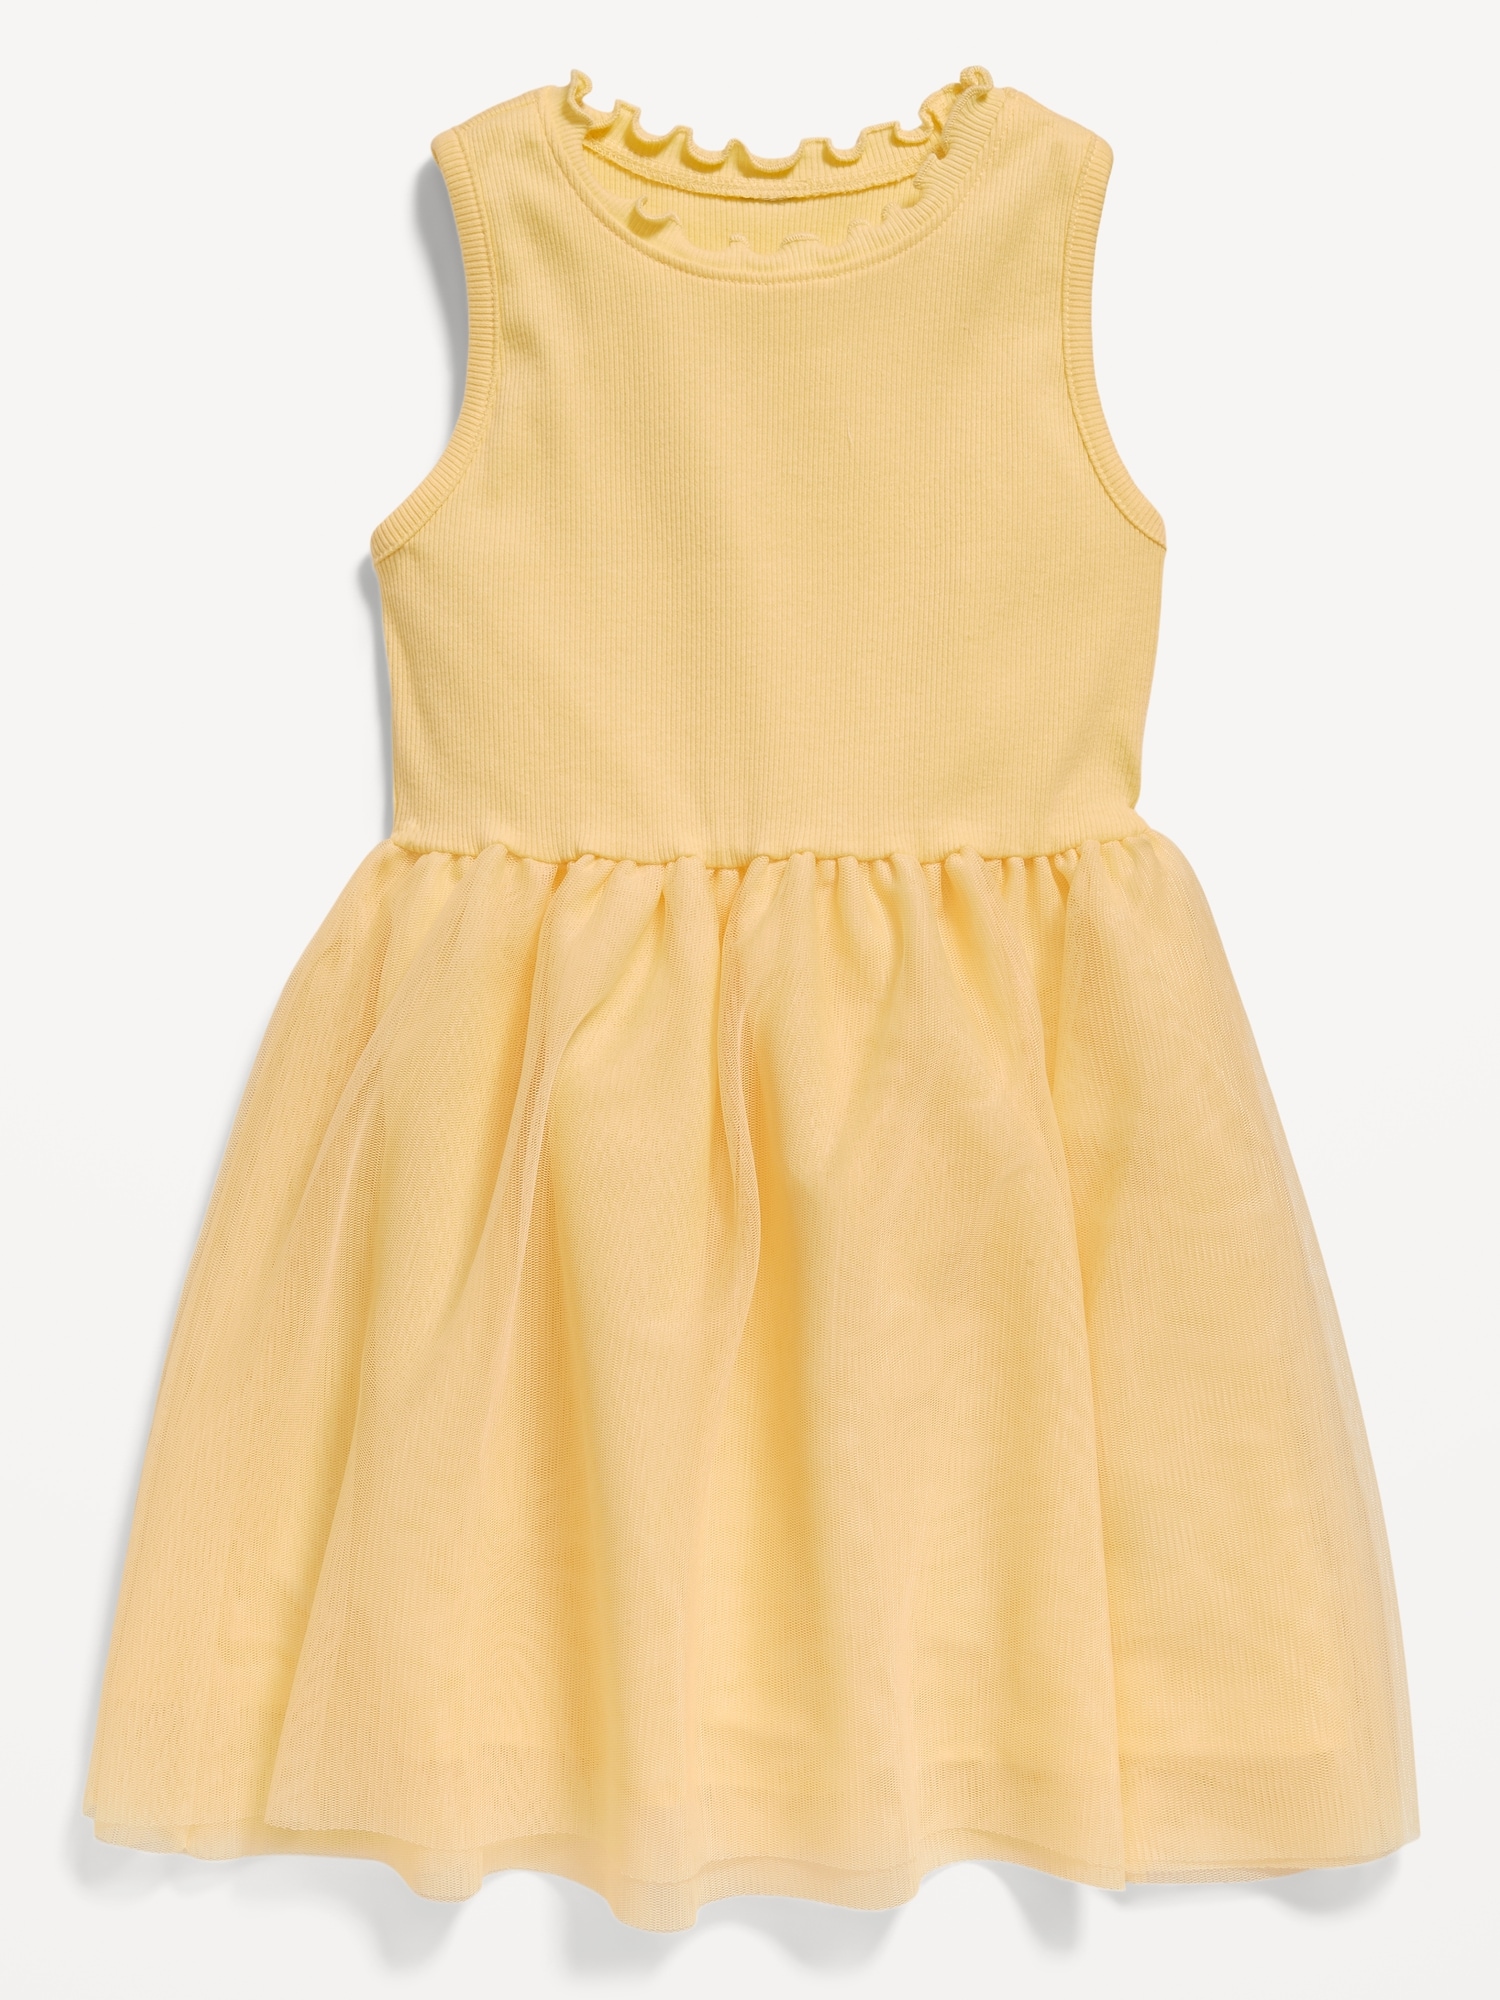 Sleeveless Fit and Flare Tutu Dress for Toddler Girls